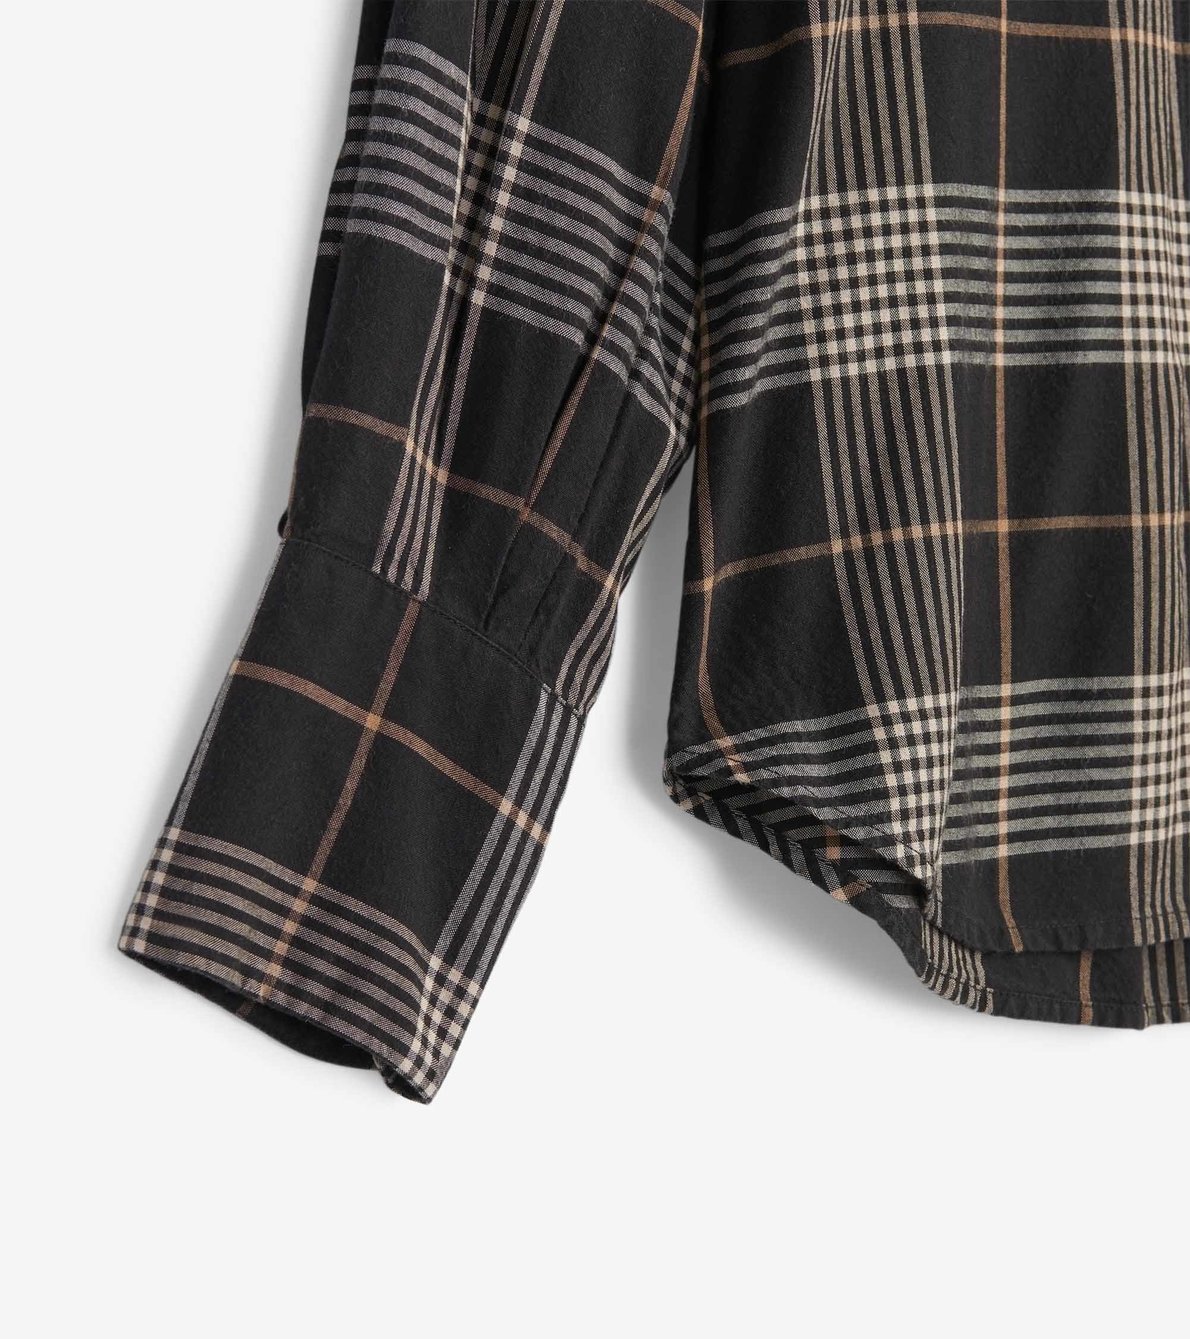 View larger image of Olivia Blouse - Black Check Plaid